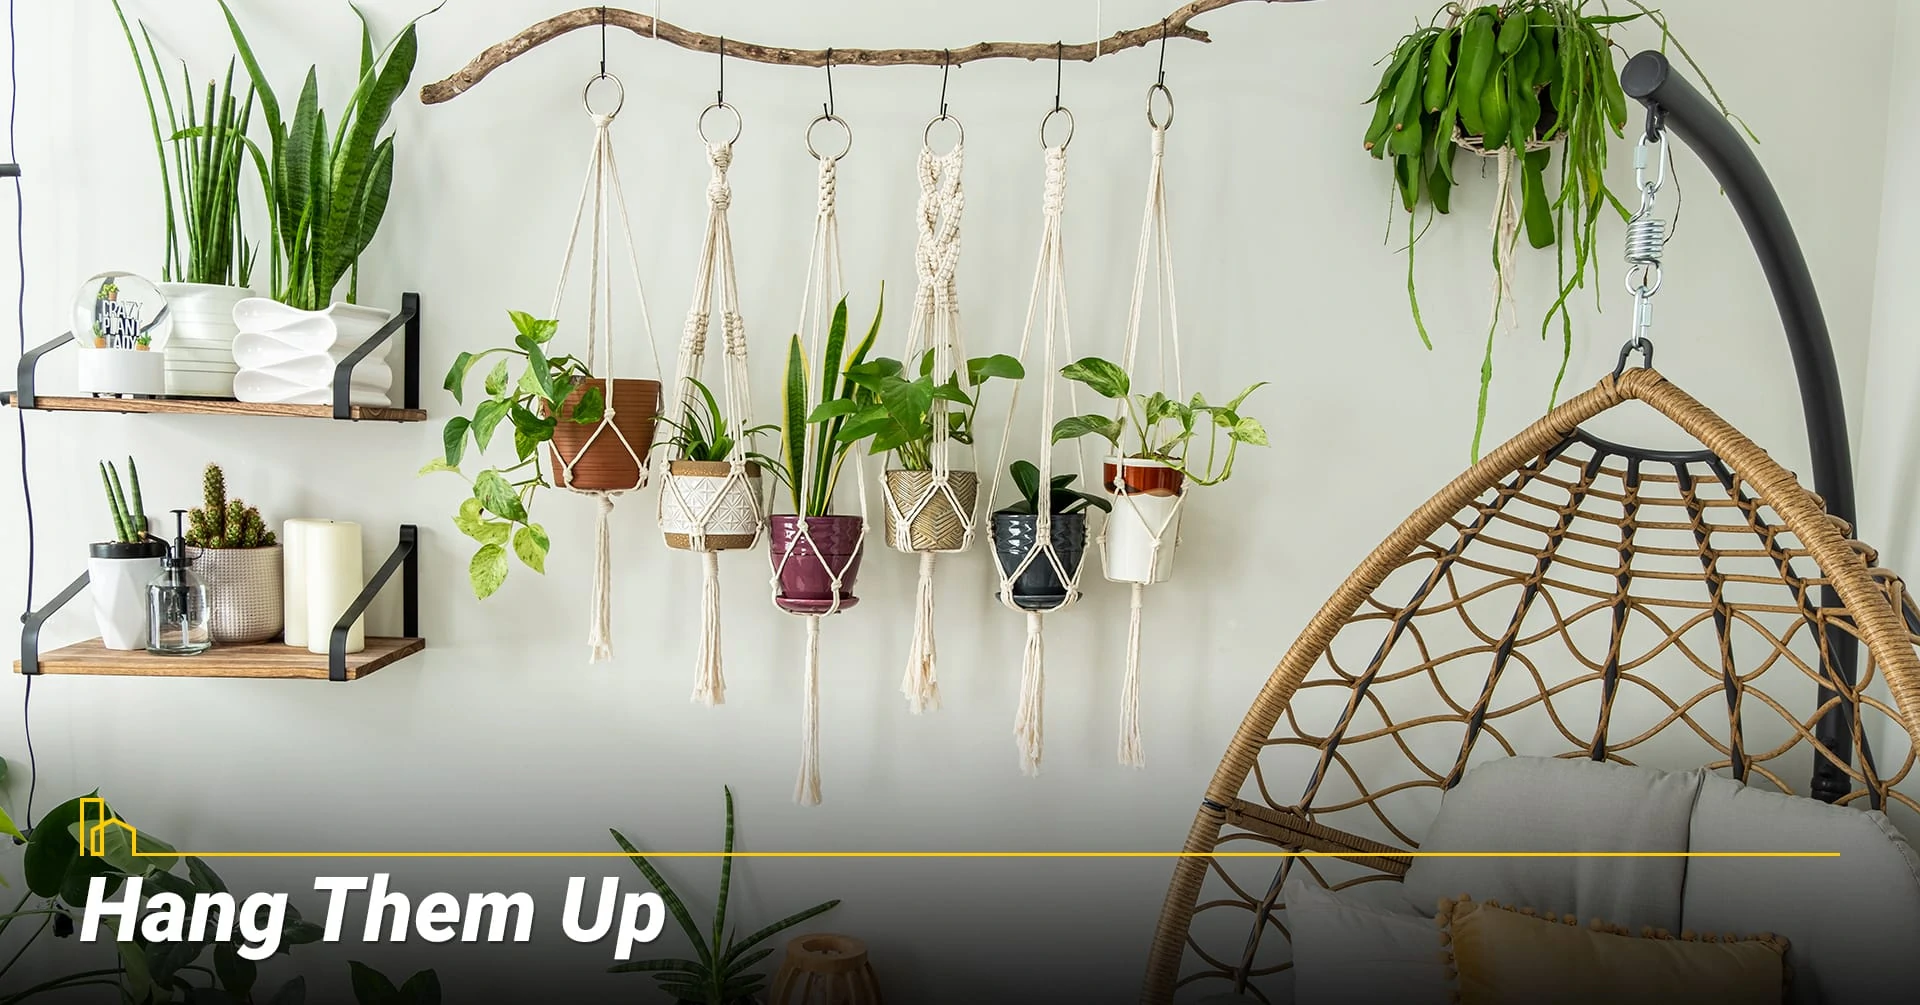 Hang Them Up, Make good use of indoor plants